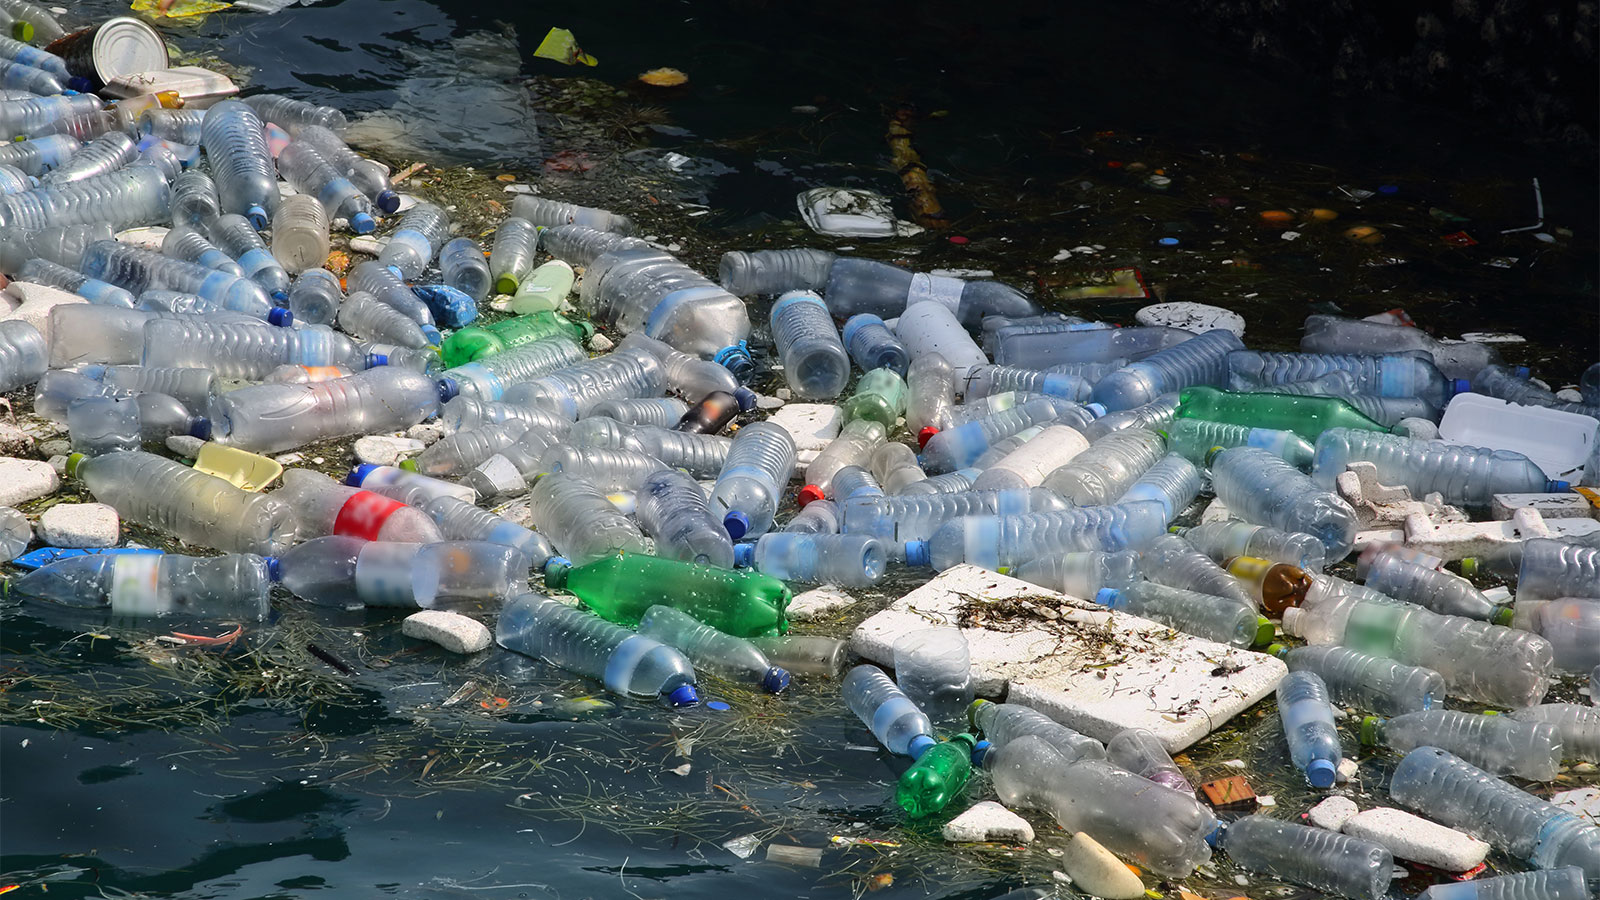 Plastic bottles and other trash floating in water